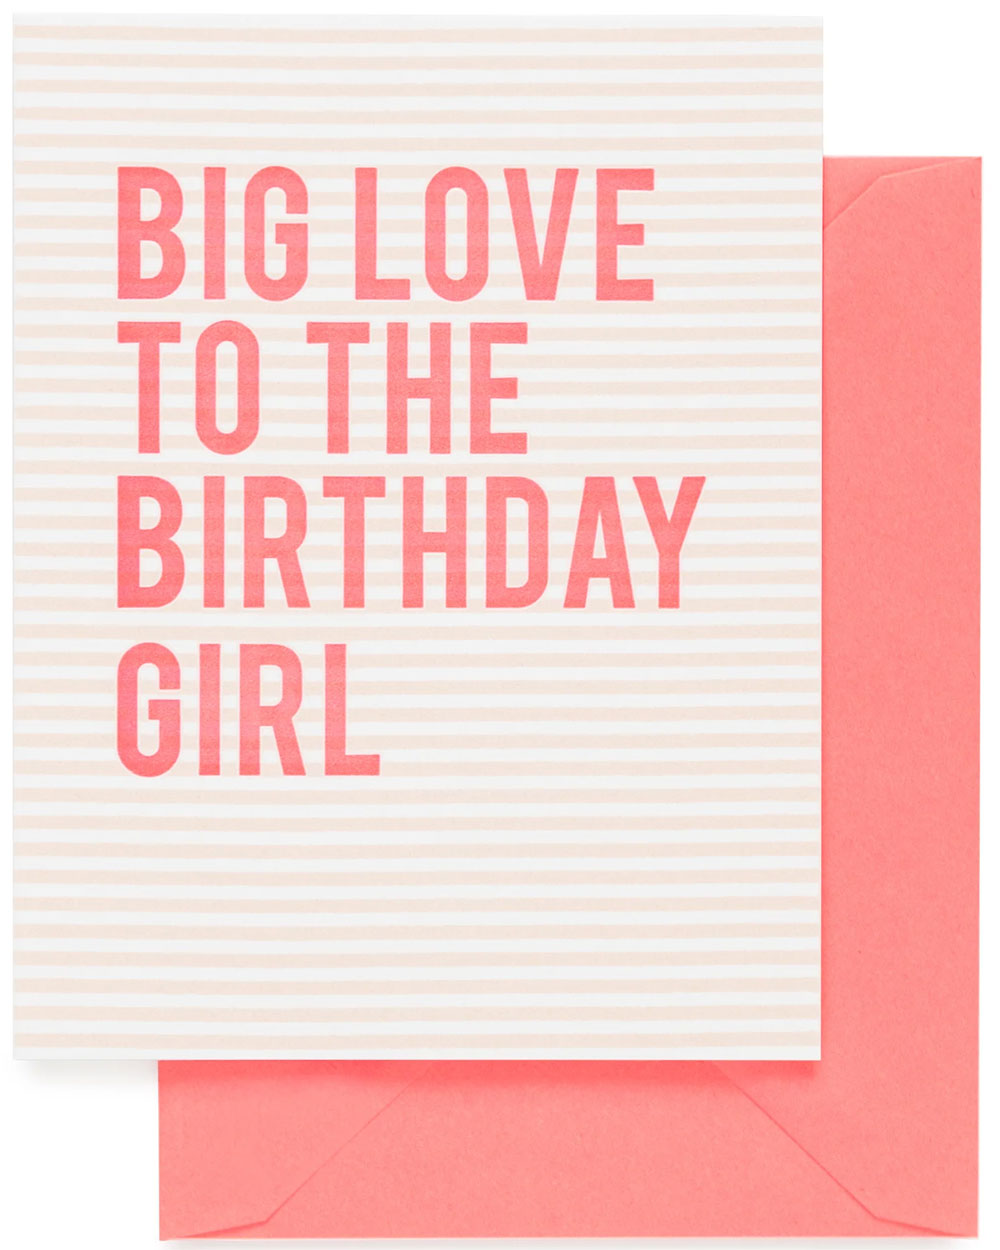 Big Love For The Birthday Girl Card